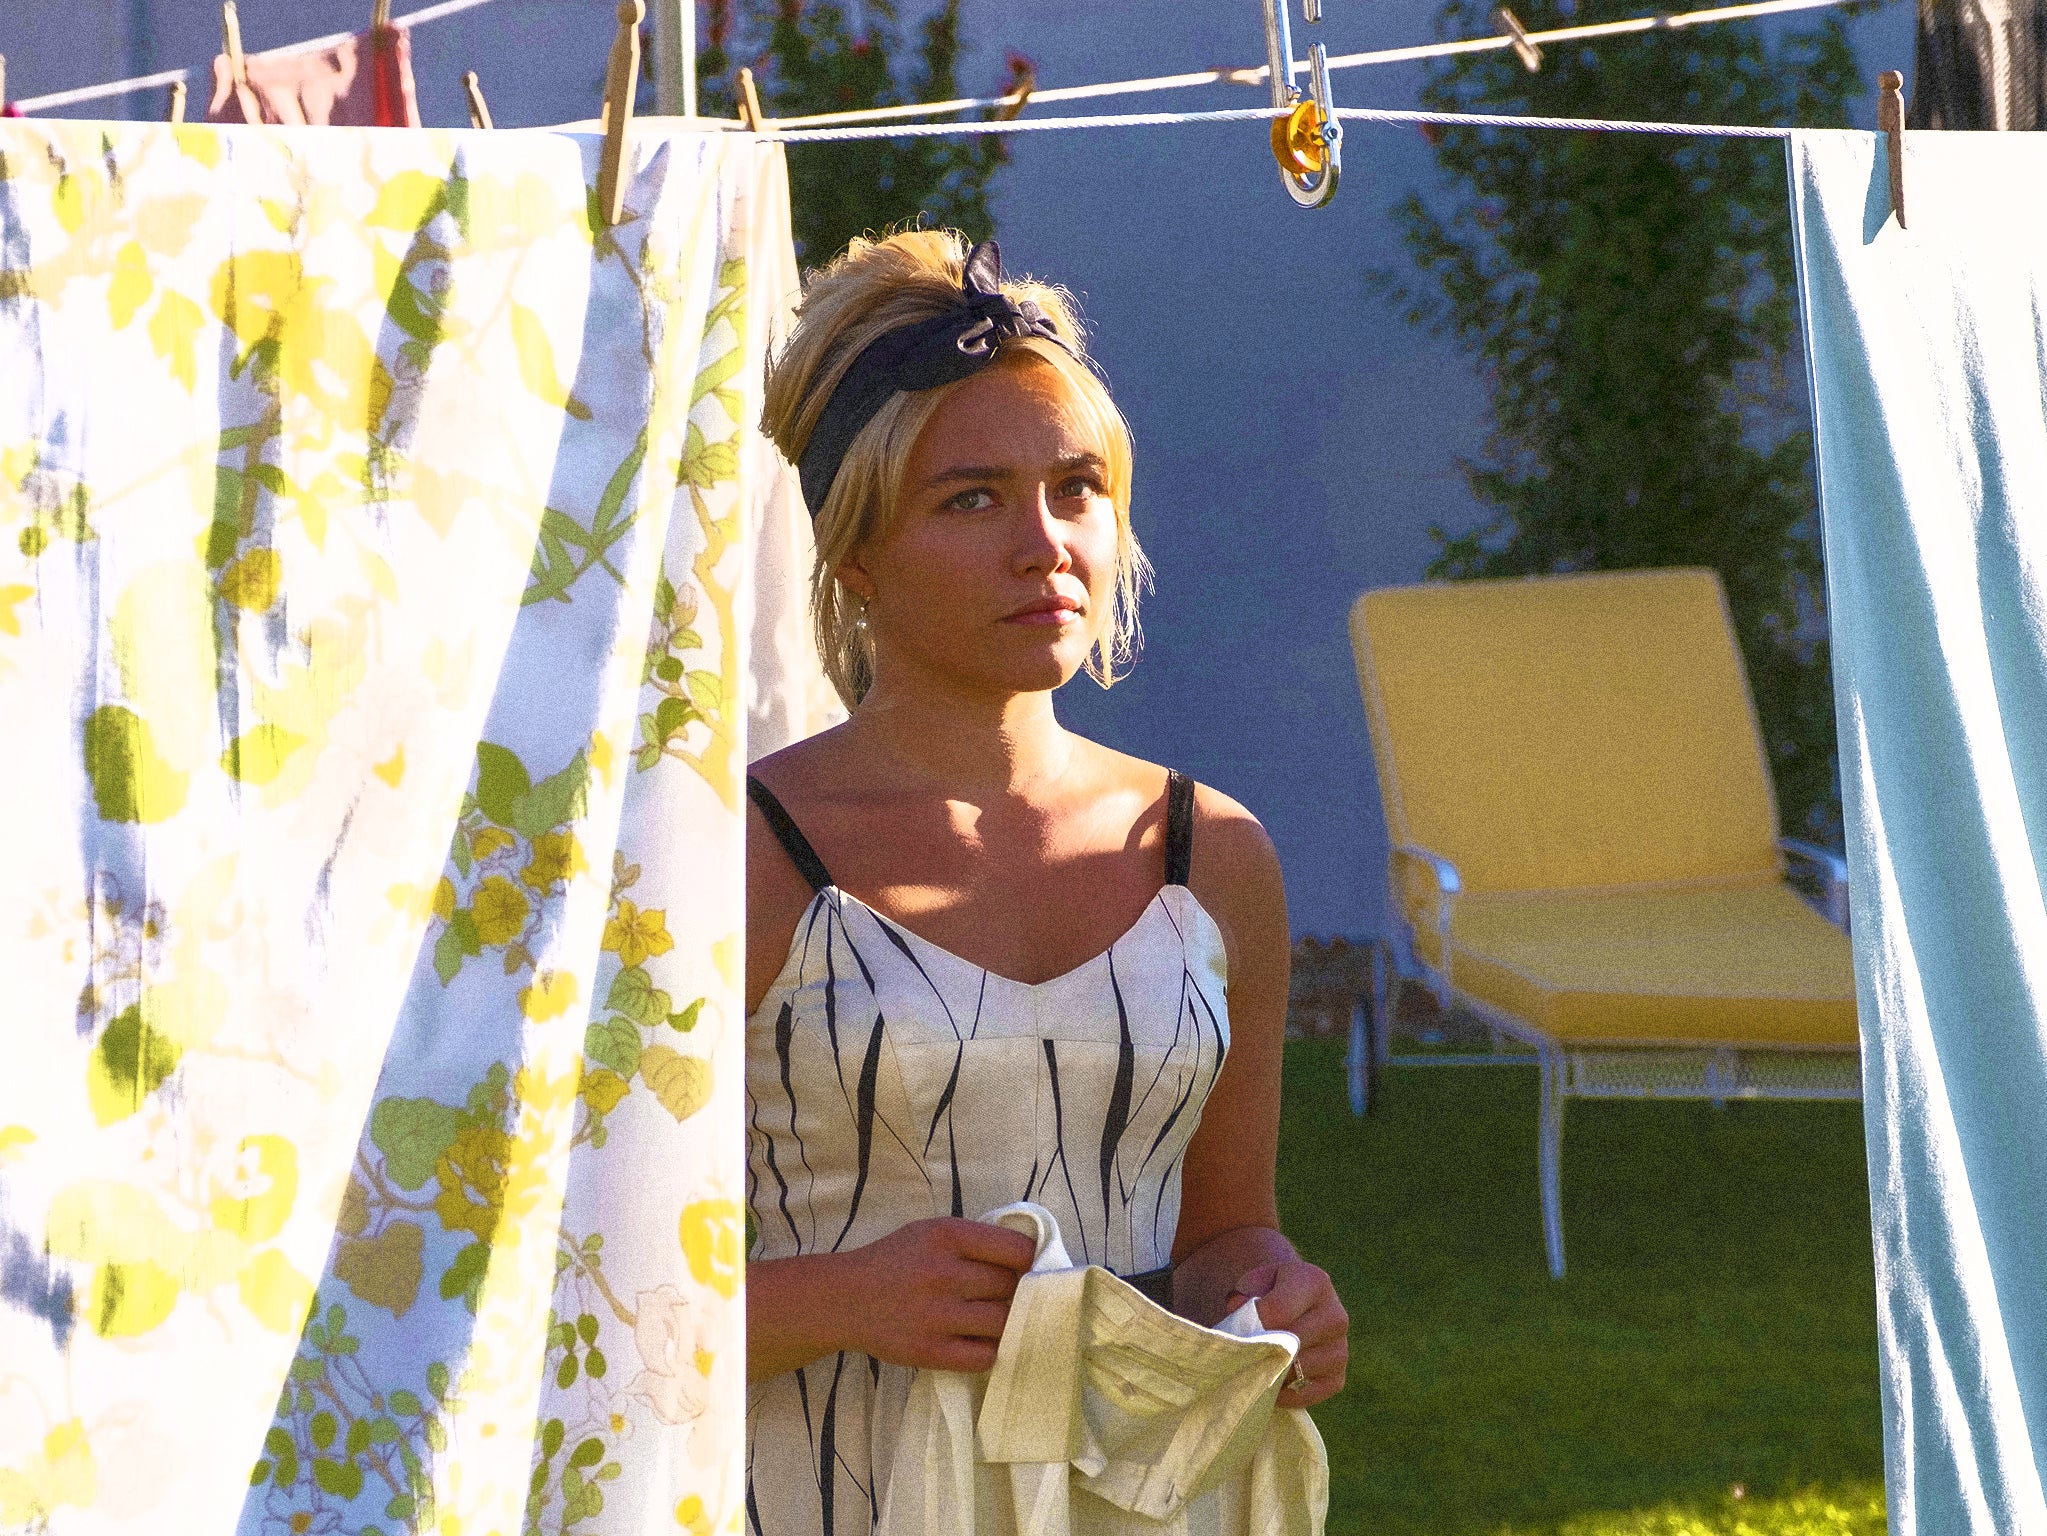 Florence Pugh hangs out the washing in ‘Don’t Worry Darling’